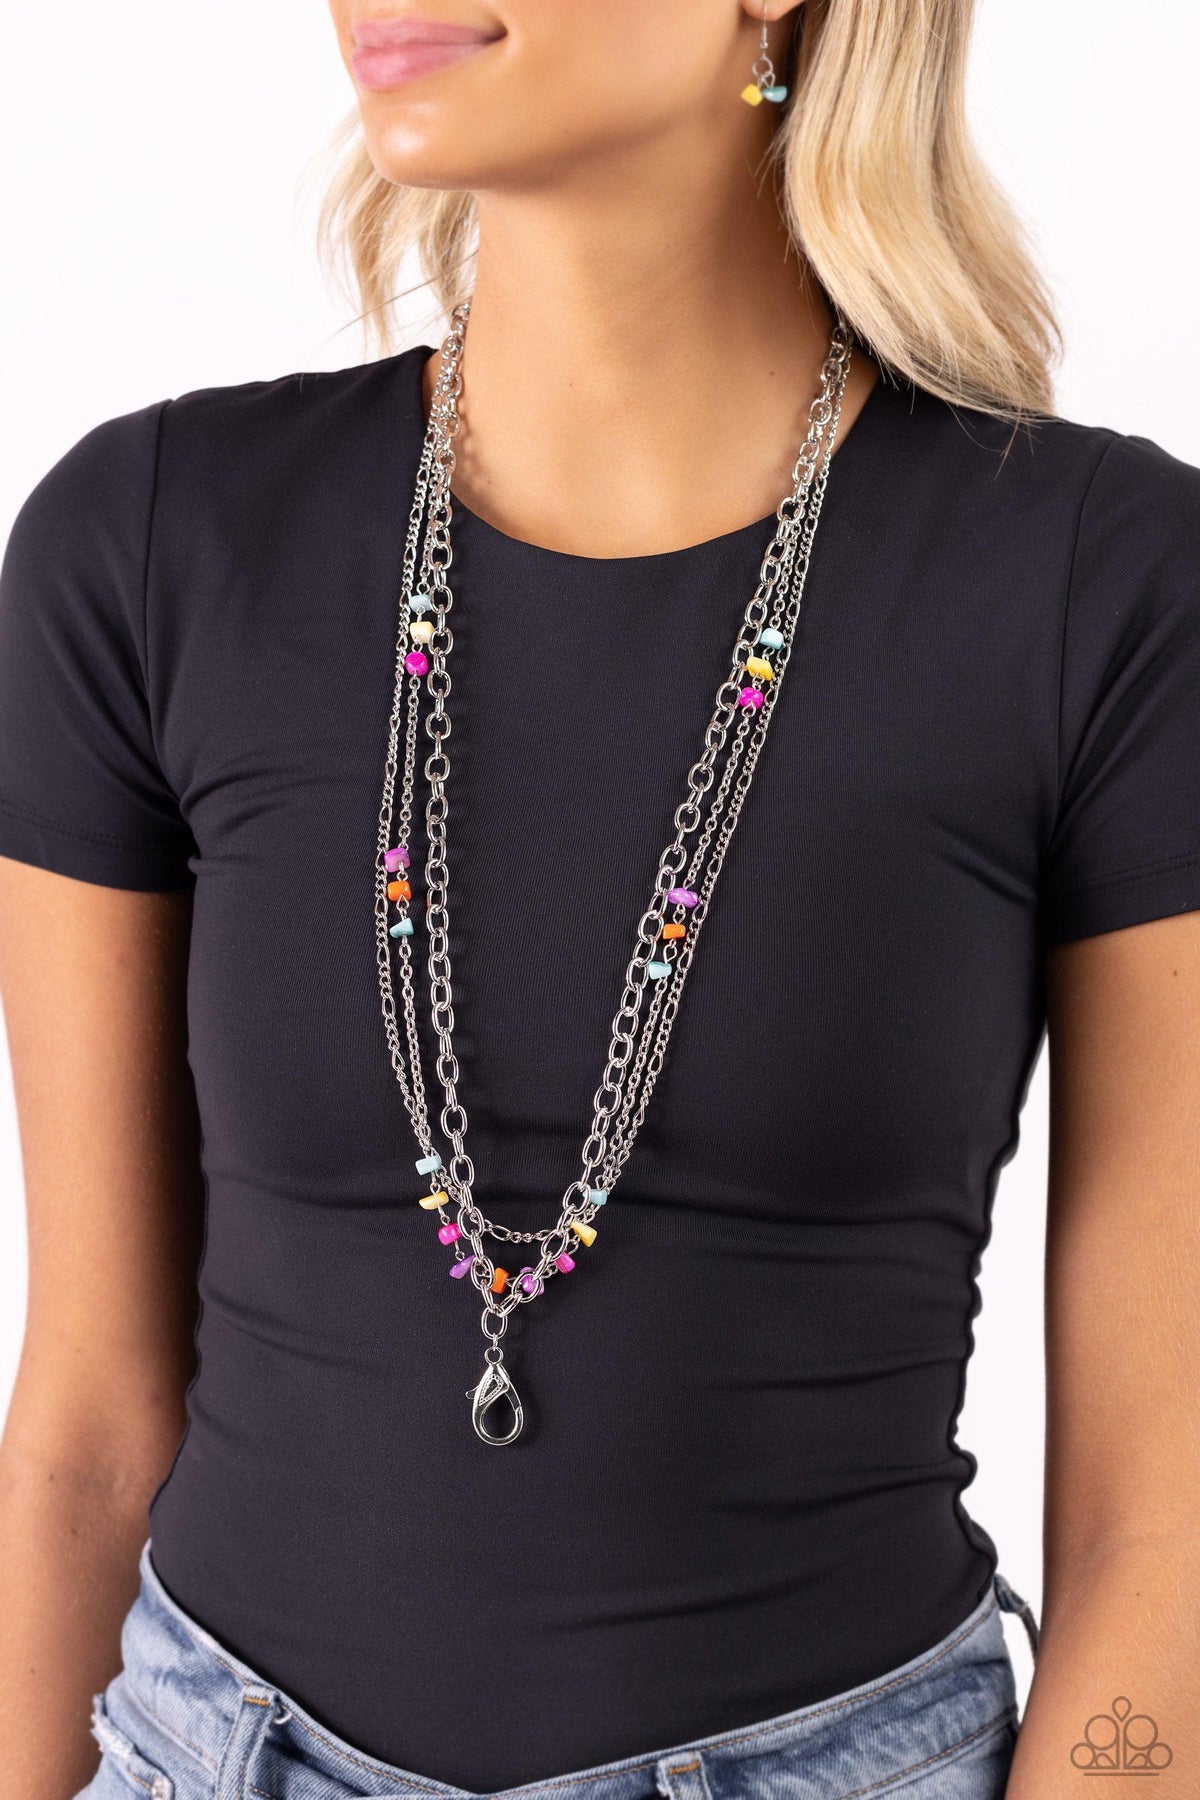 Seize the Stacks Multi Lanyard Necklace - Paparazzi Accessories-on model - CarasShop.com - $5 Jewelry by Cara Jewels